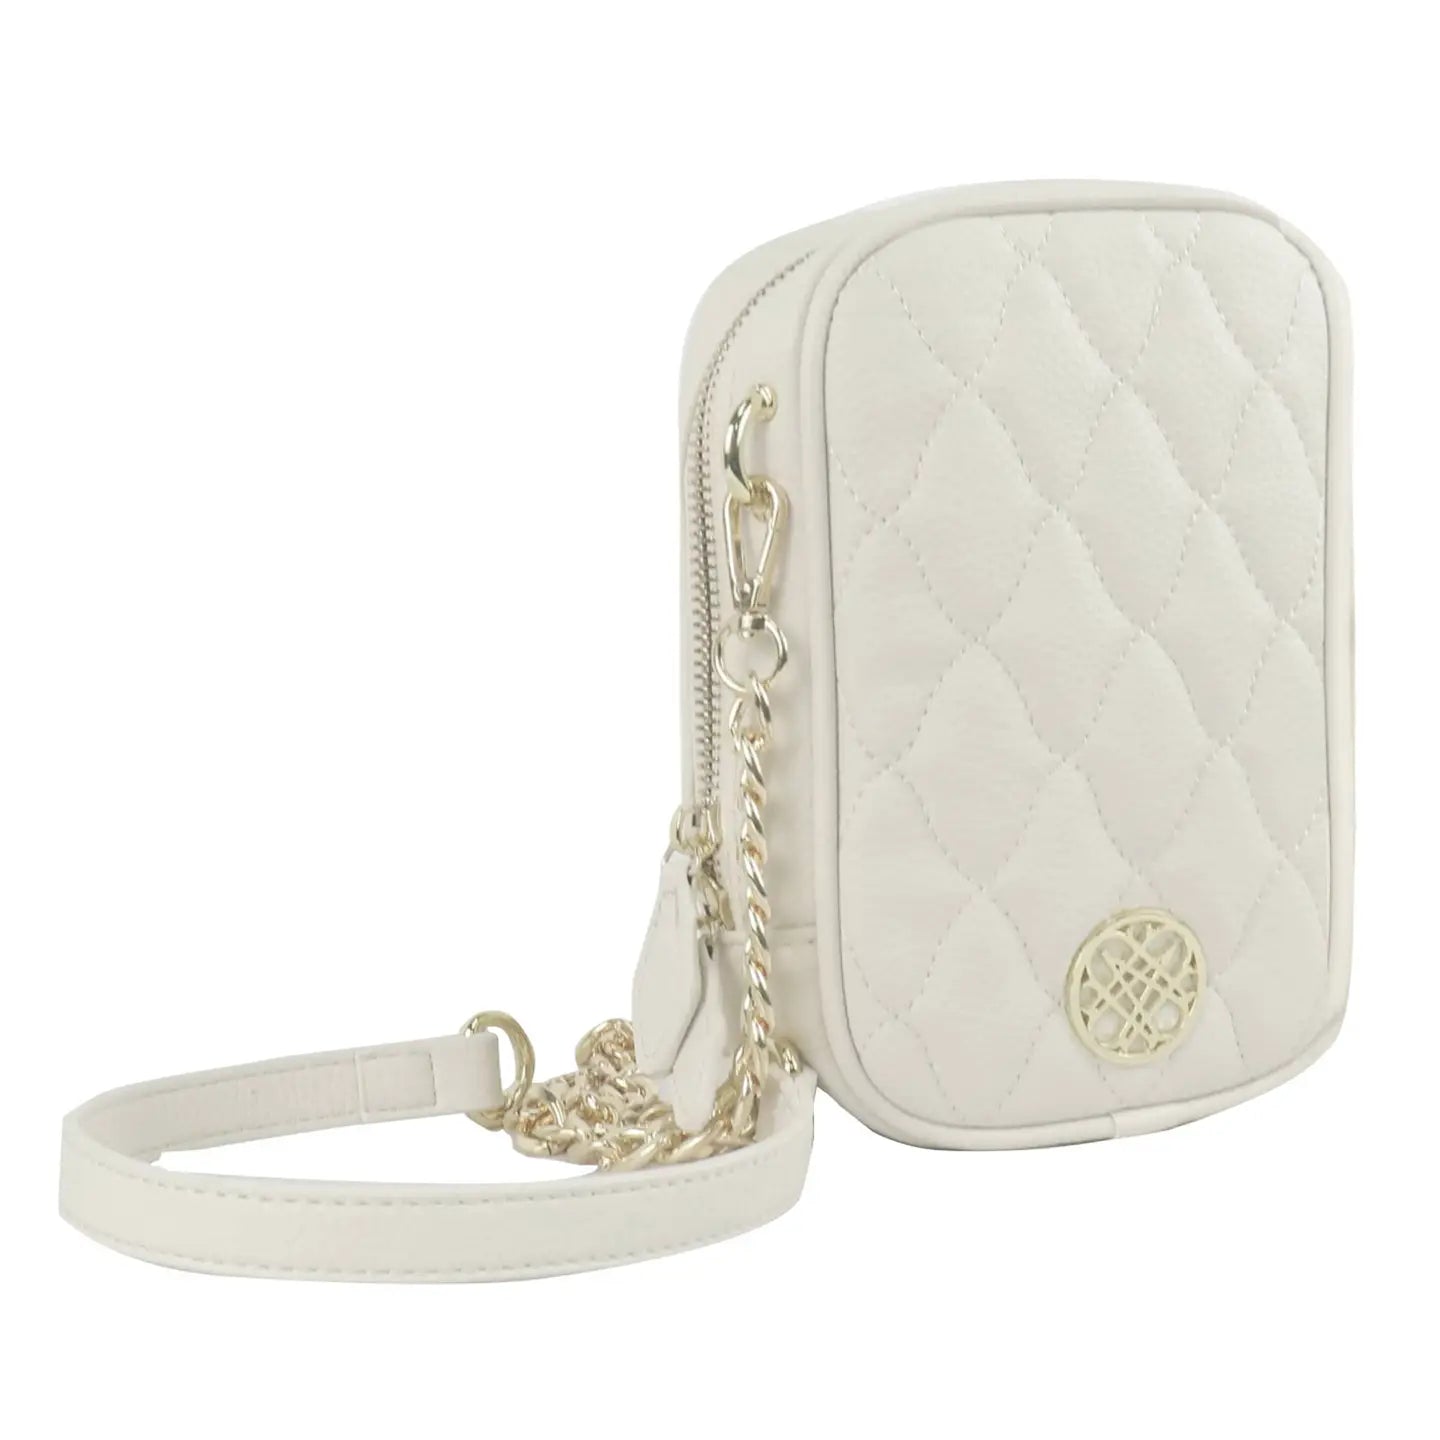 Natalie Wood - Grace Quilted Crossbody in Cream-130 Accessories-Natalie Wood-July & June Women's Fashion Boutique Located in San Antonio, Texas